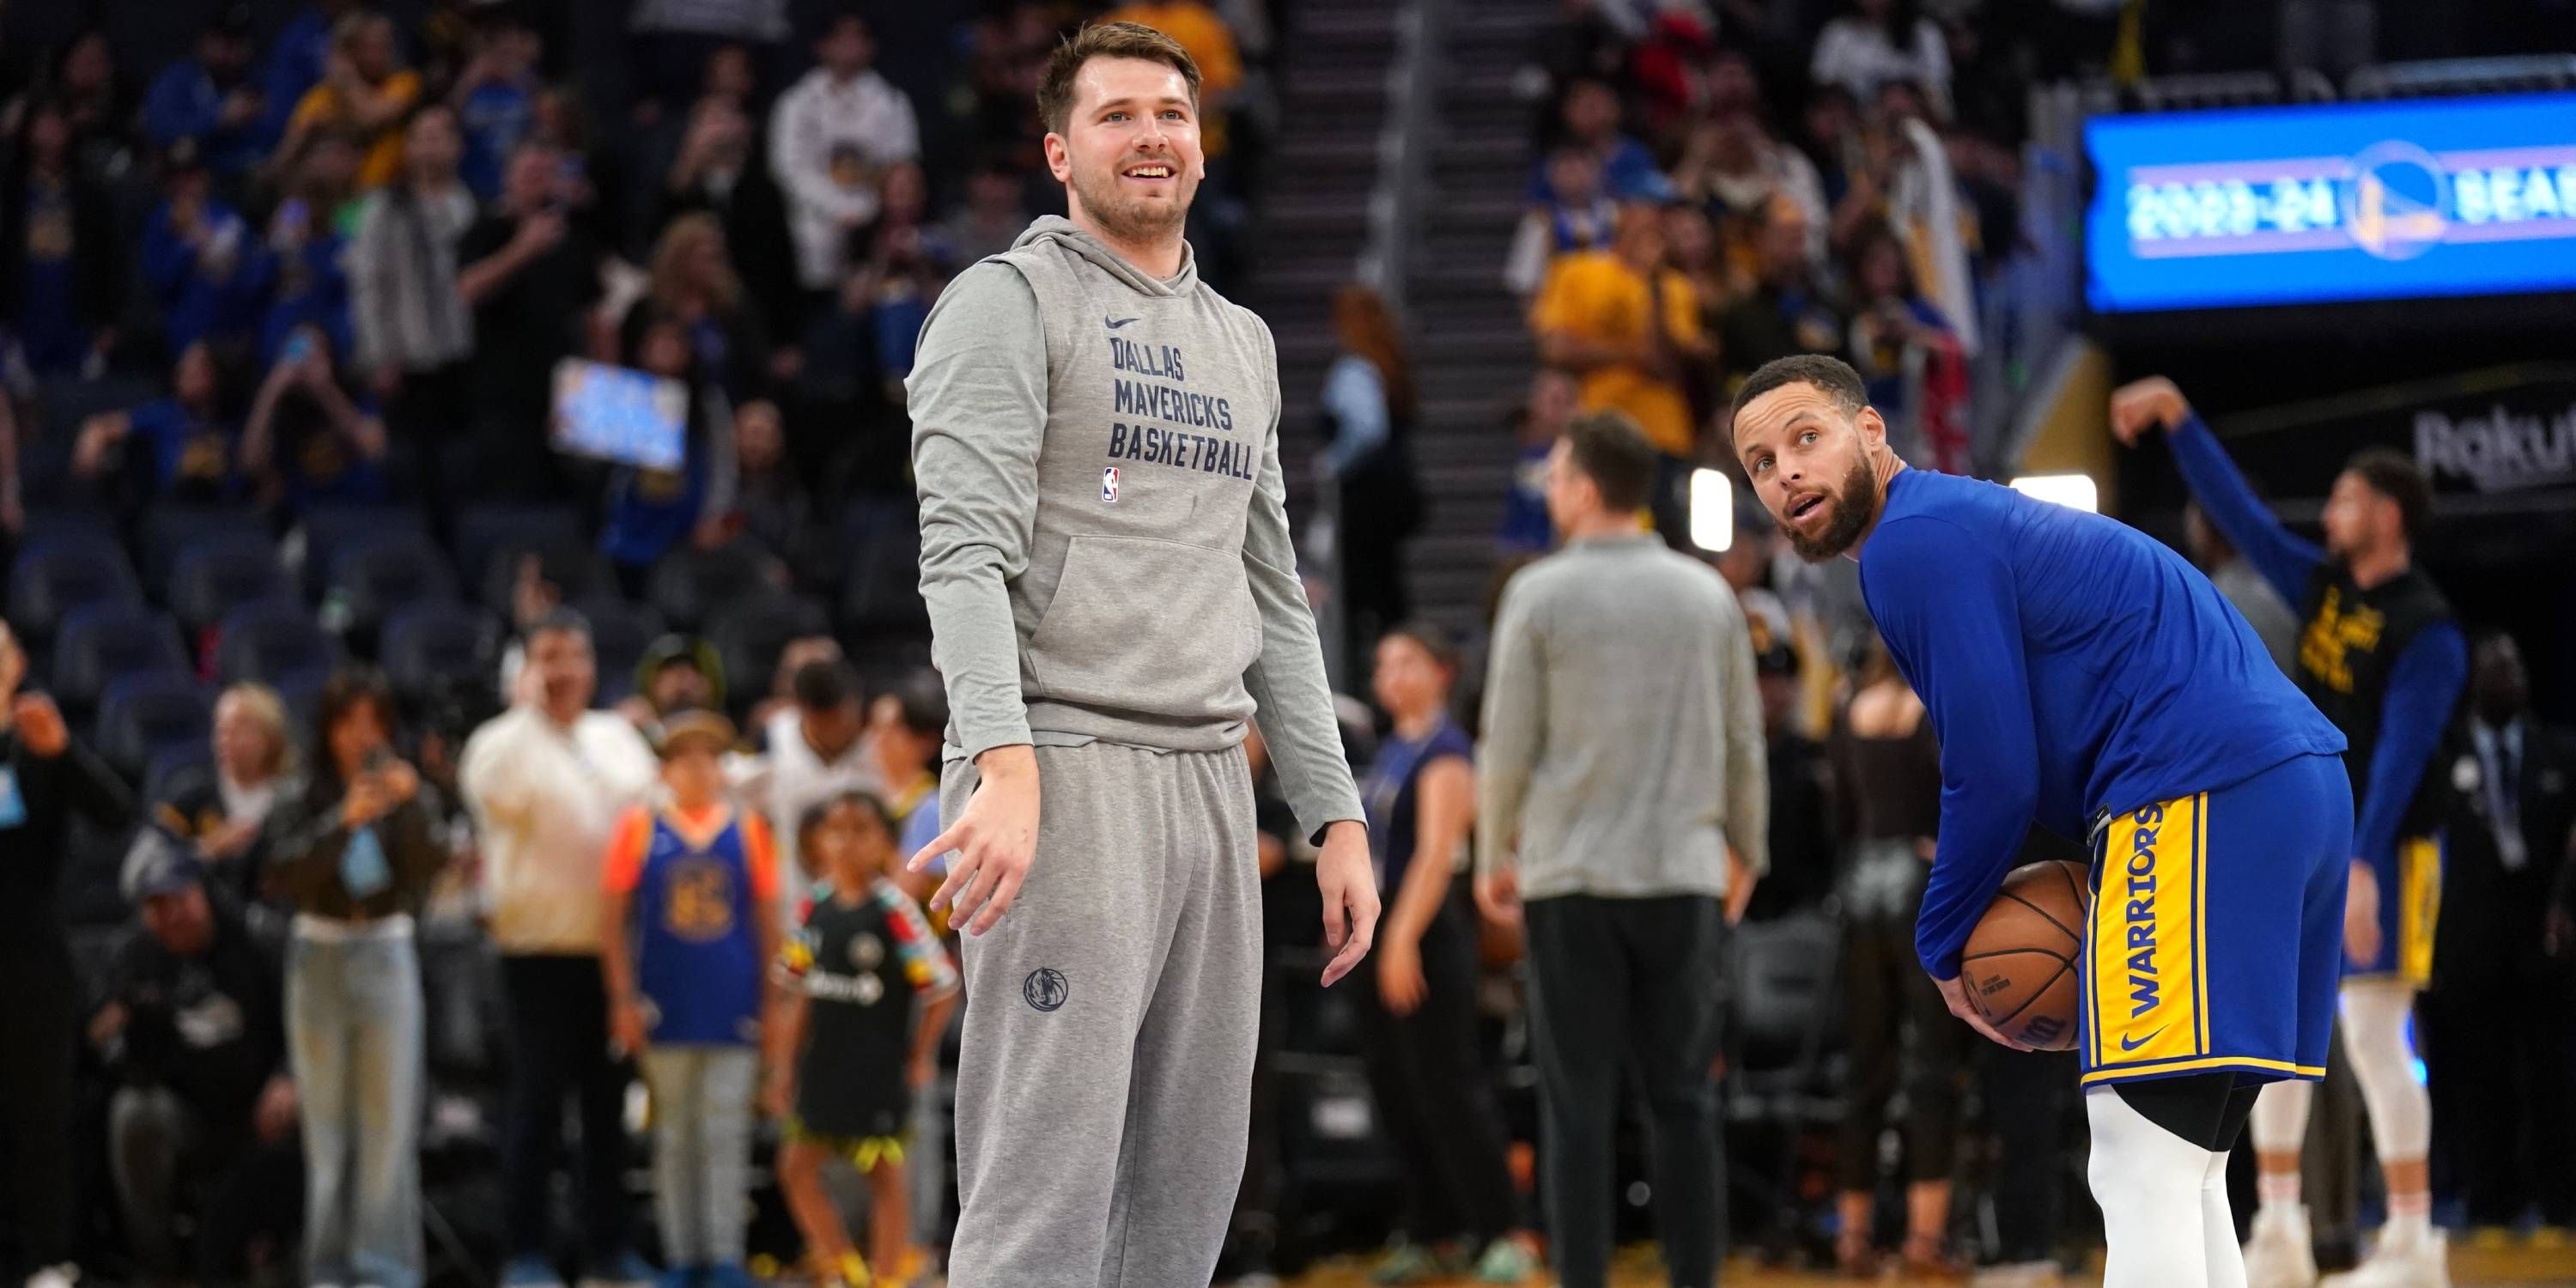 Luka Dončić and Stephen Curry warm up before a game.